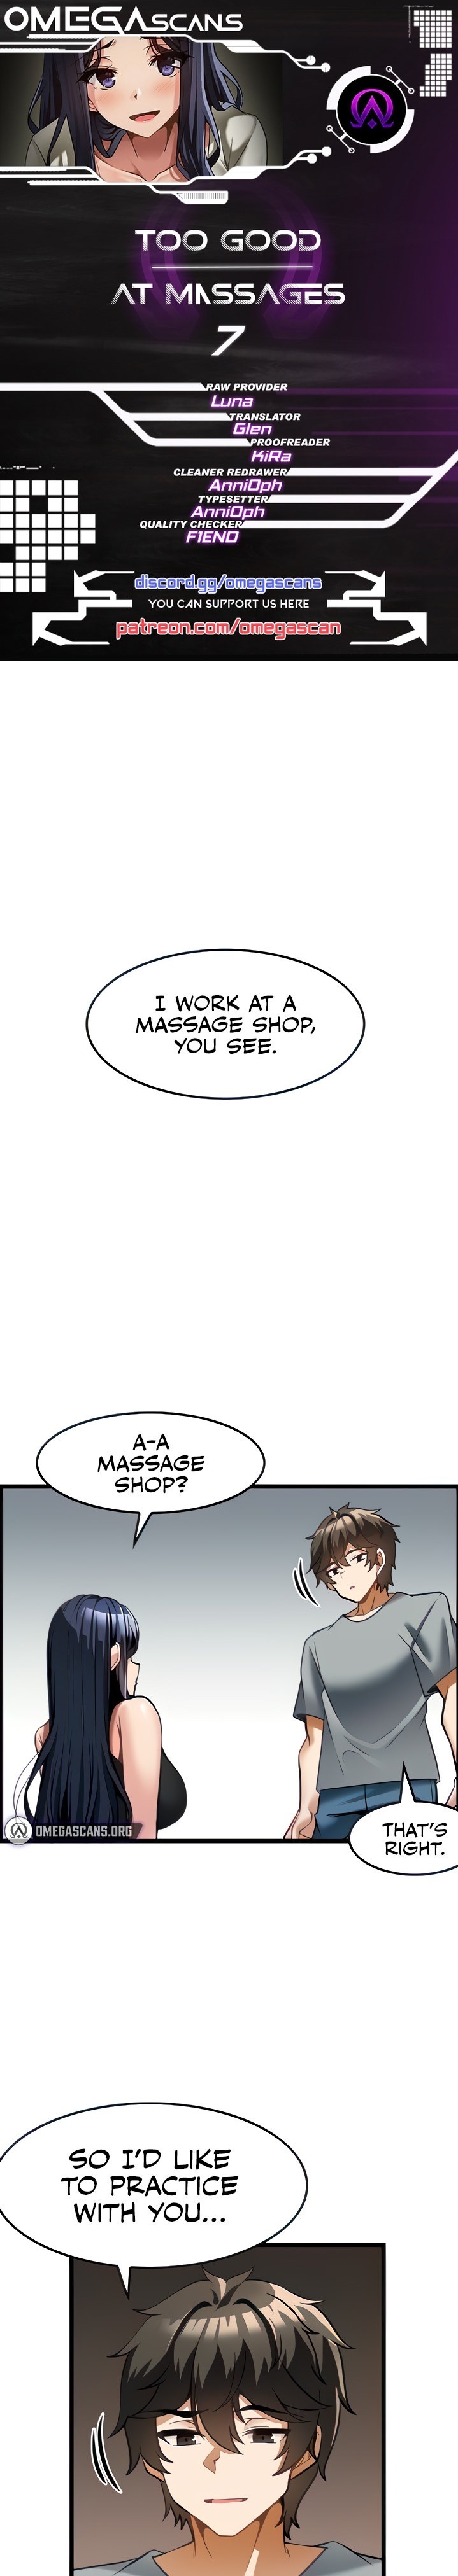 Too Good At Massages - Chapter 7 Page 1